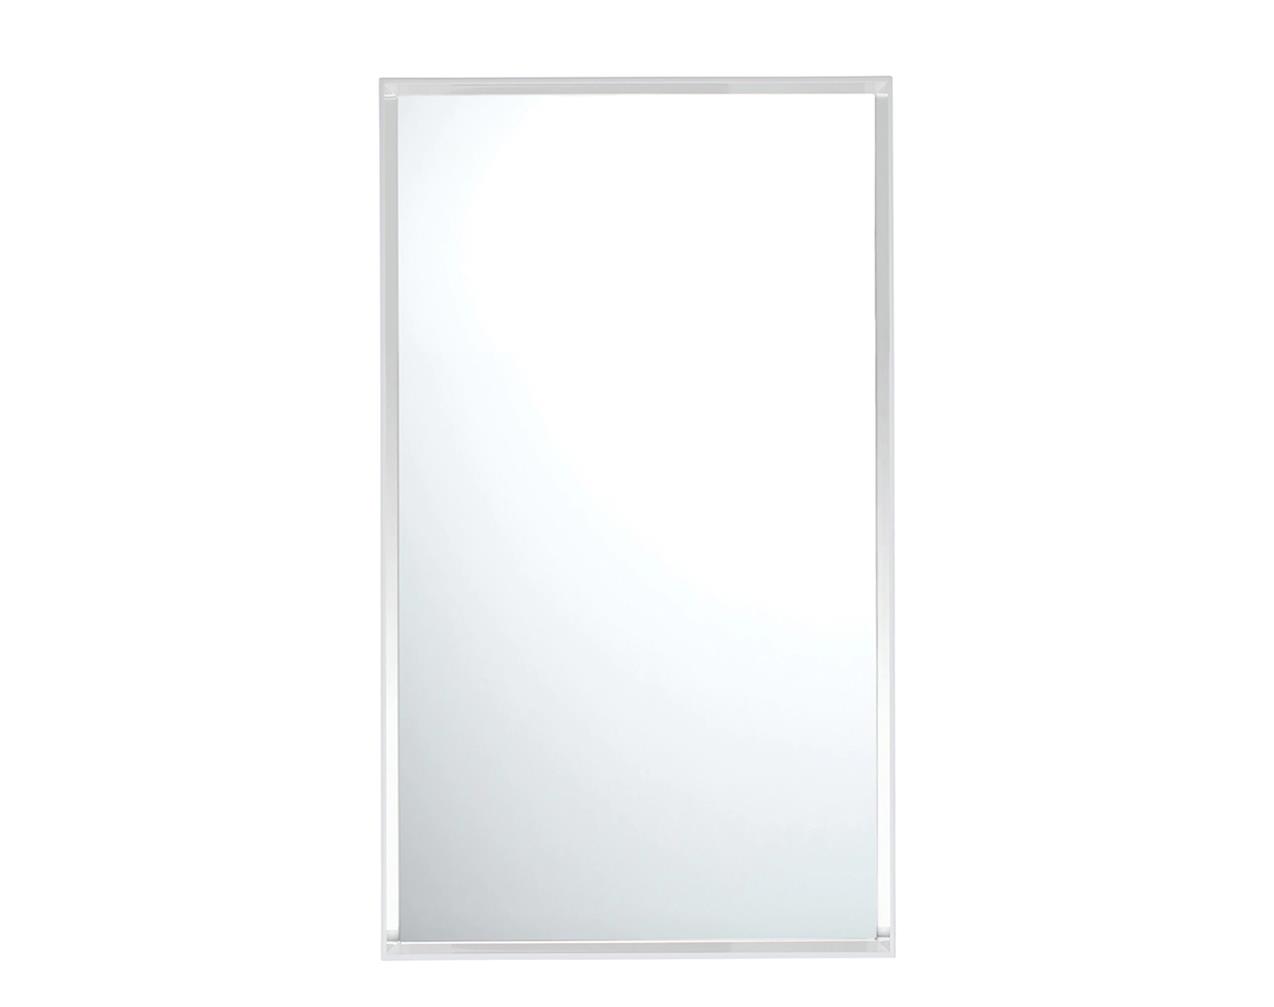 Only-Me-80x180-Glossy-White